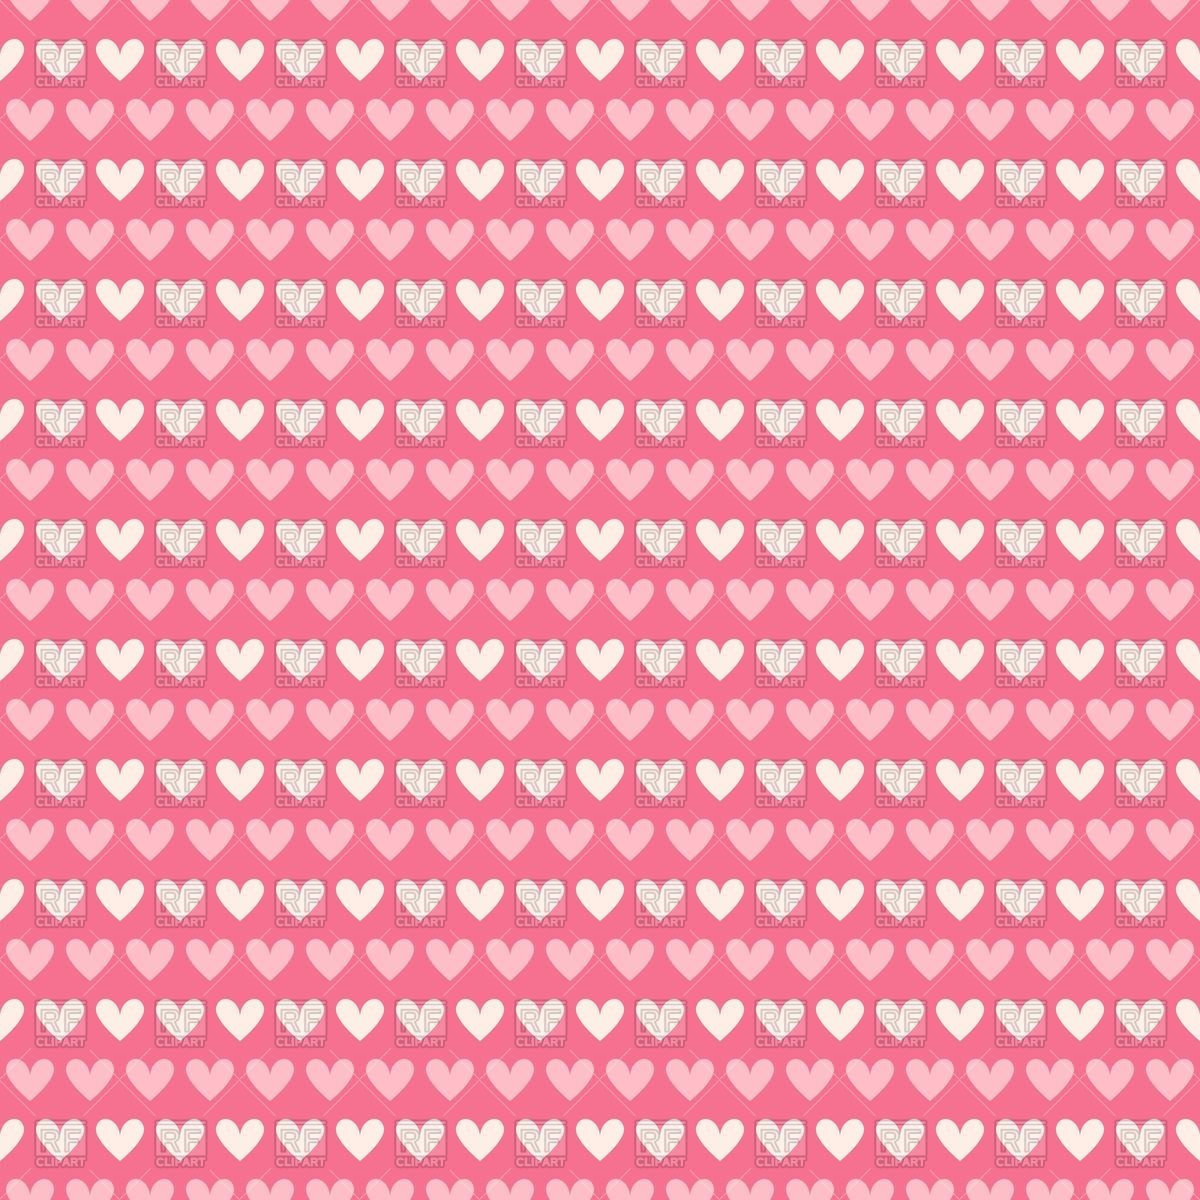 Cute Seamless Valentine S Day Background With Pink And White